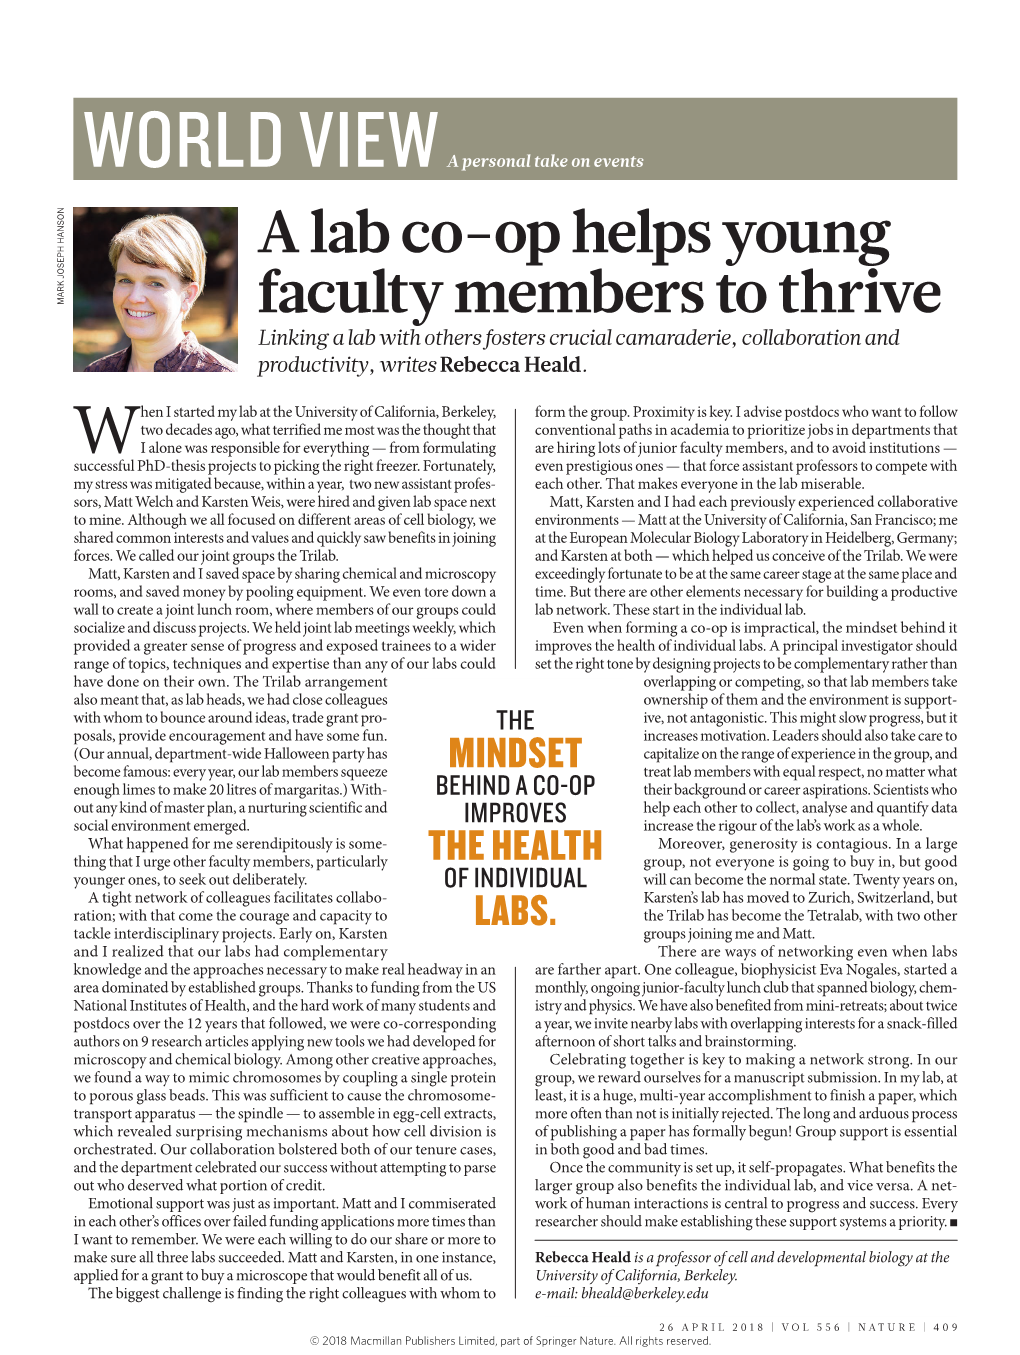 A Lab Co-Op Helps Young Faculty Members to Thrive